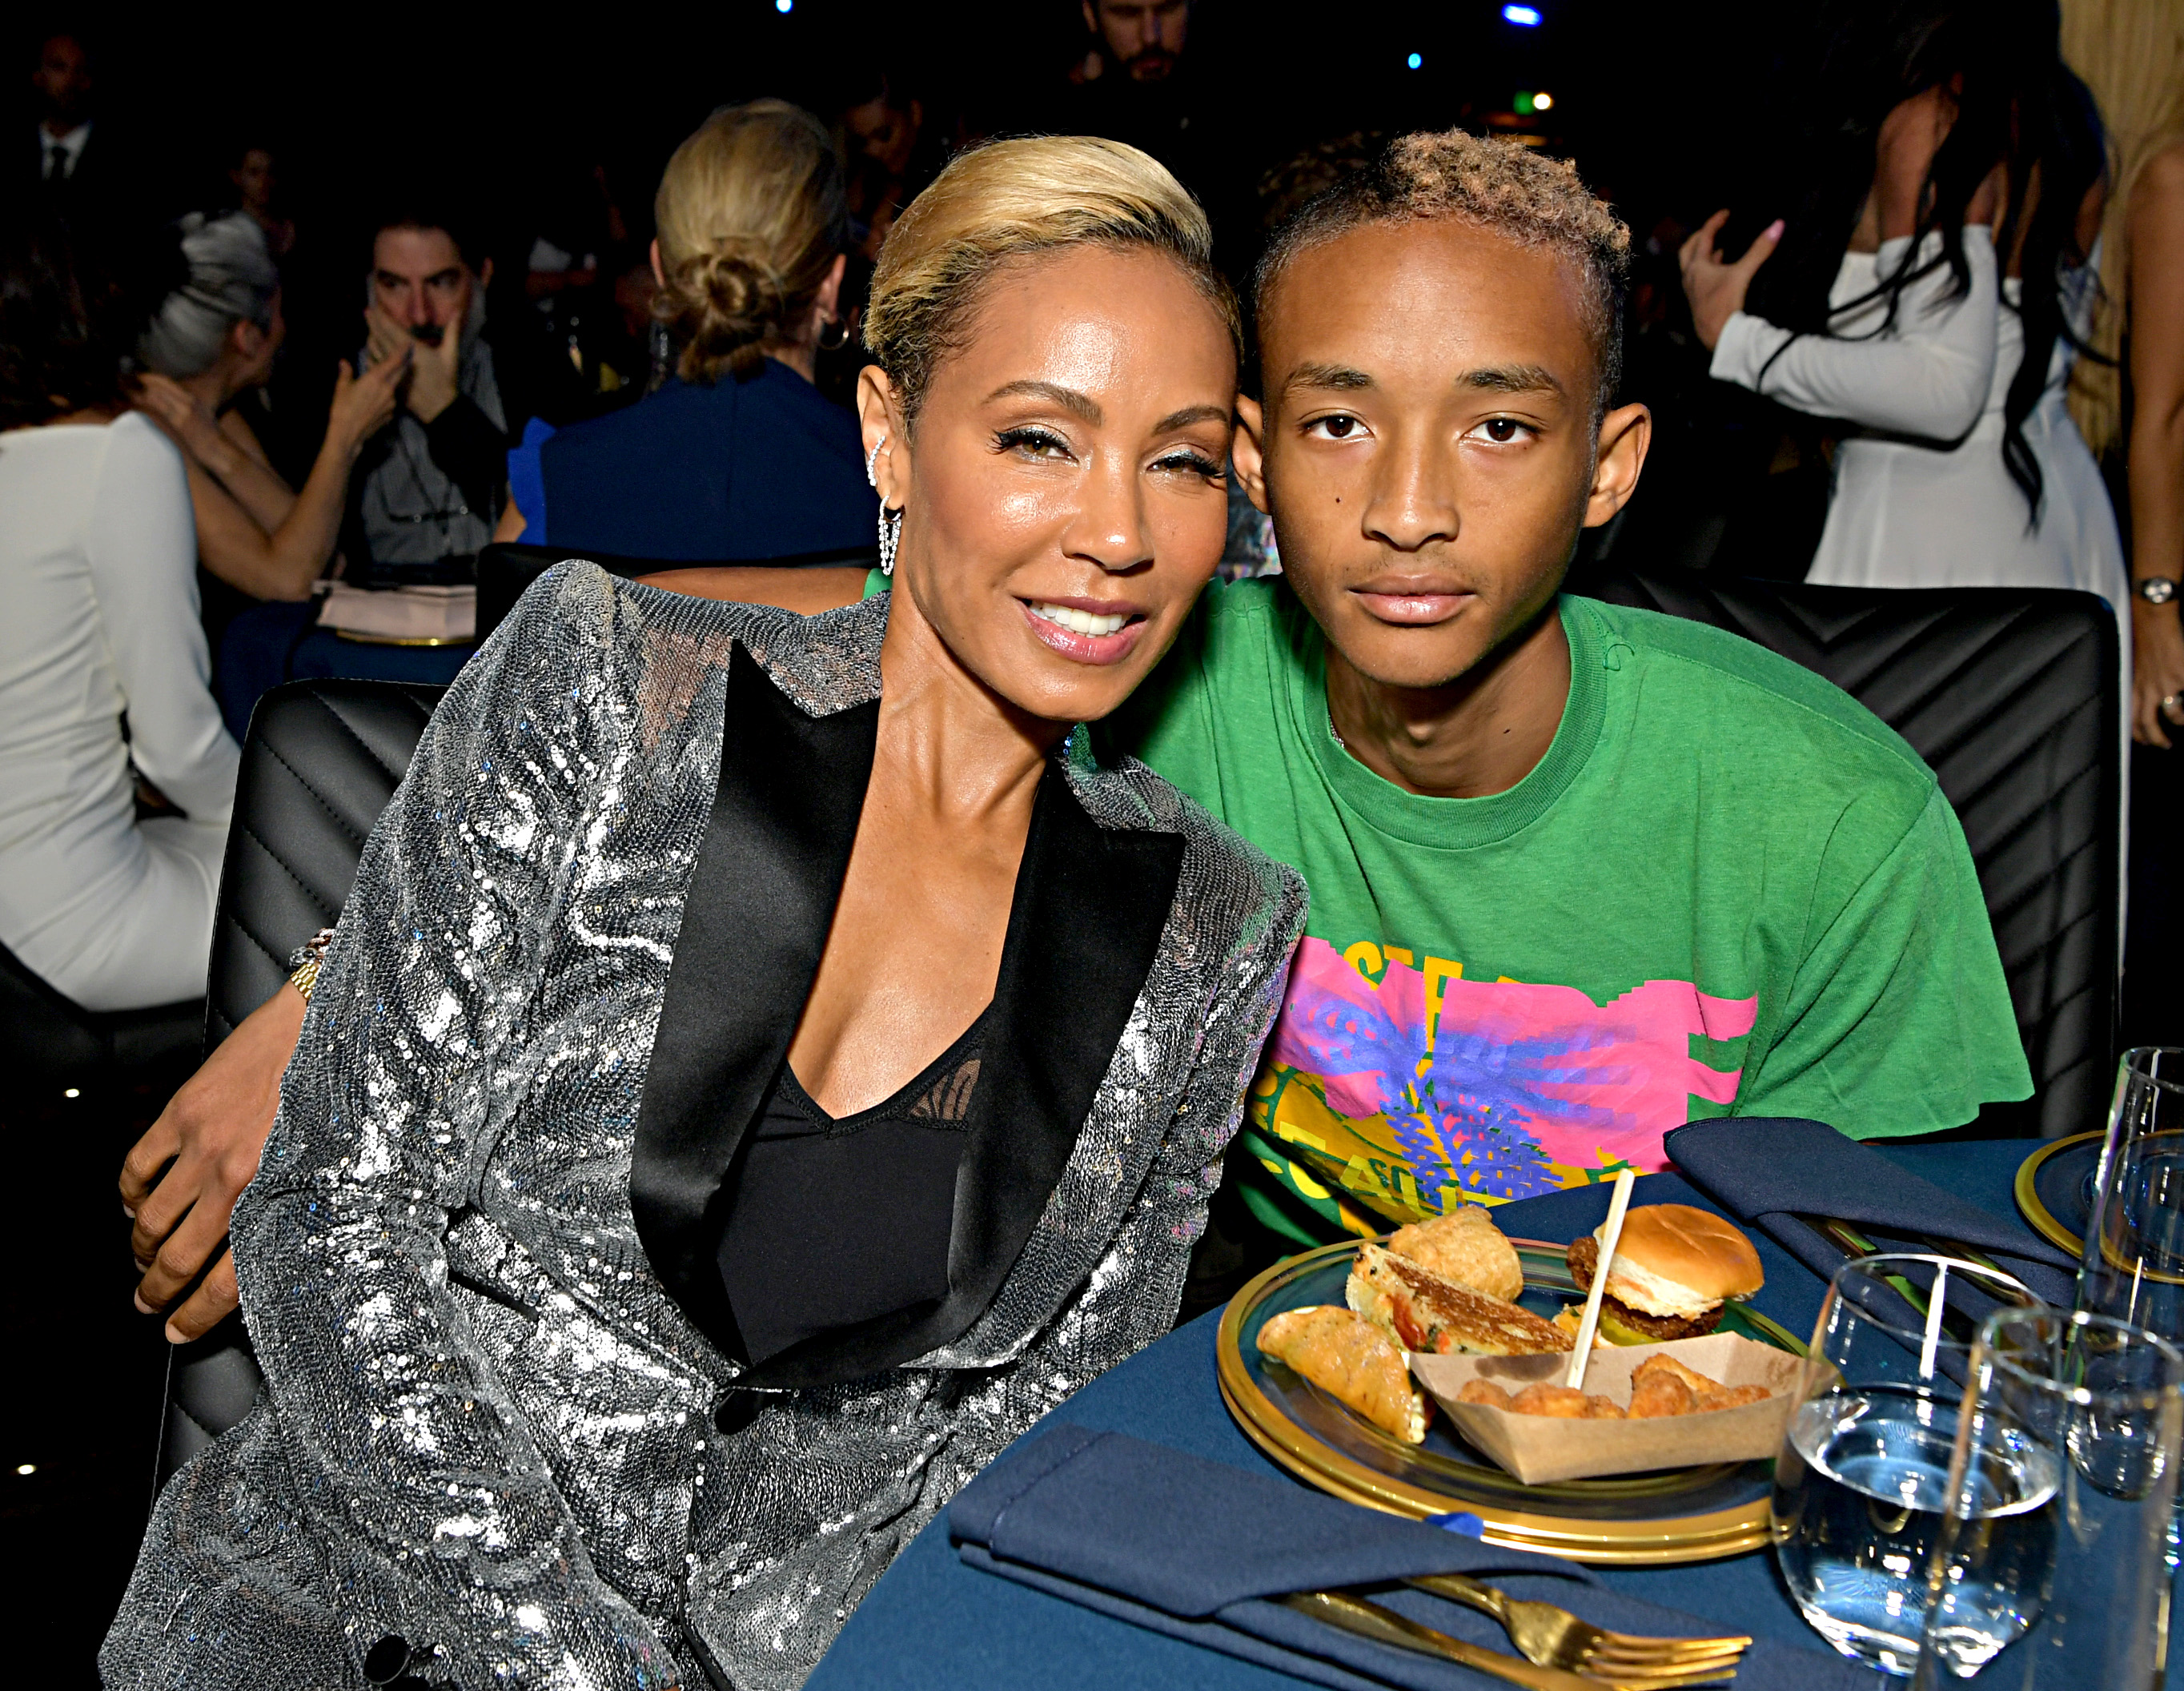 Jaden Smith: Jada Pinkett Introduced Psychedelic Drugs to the